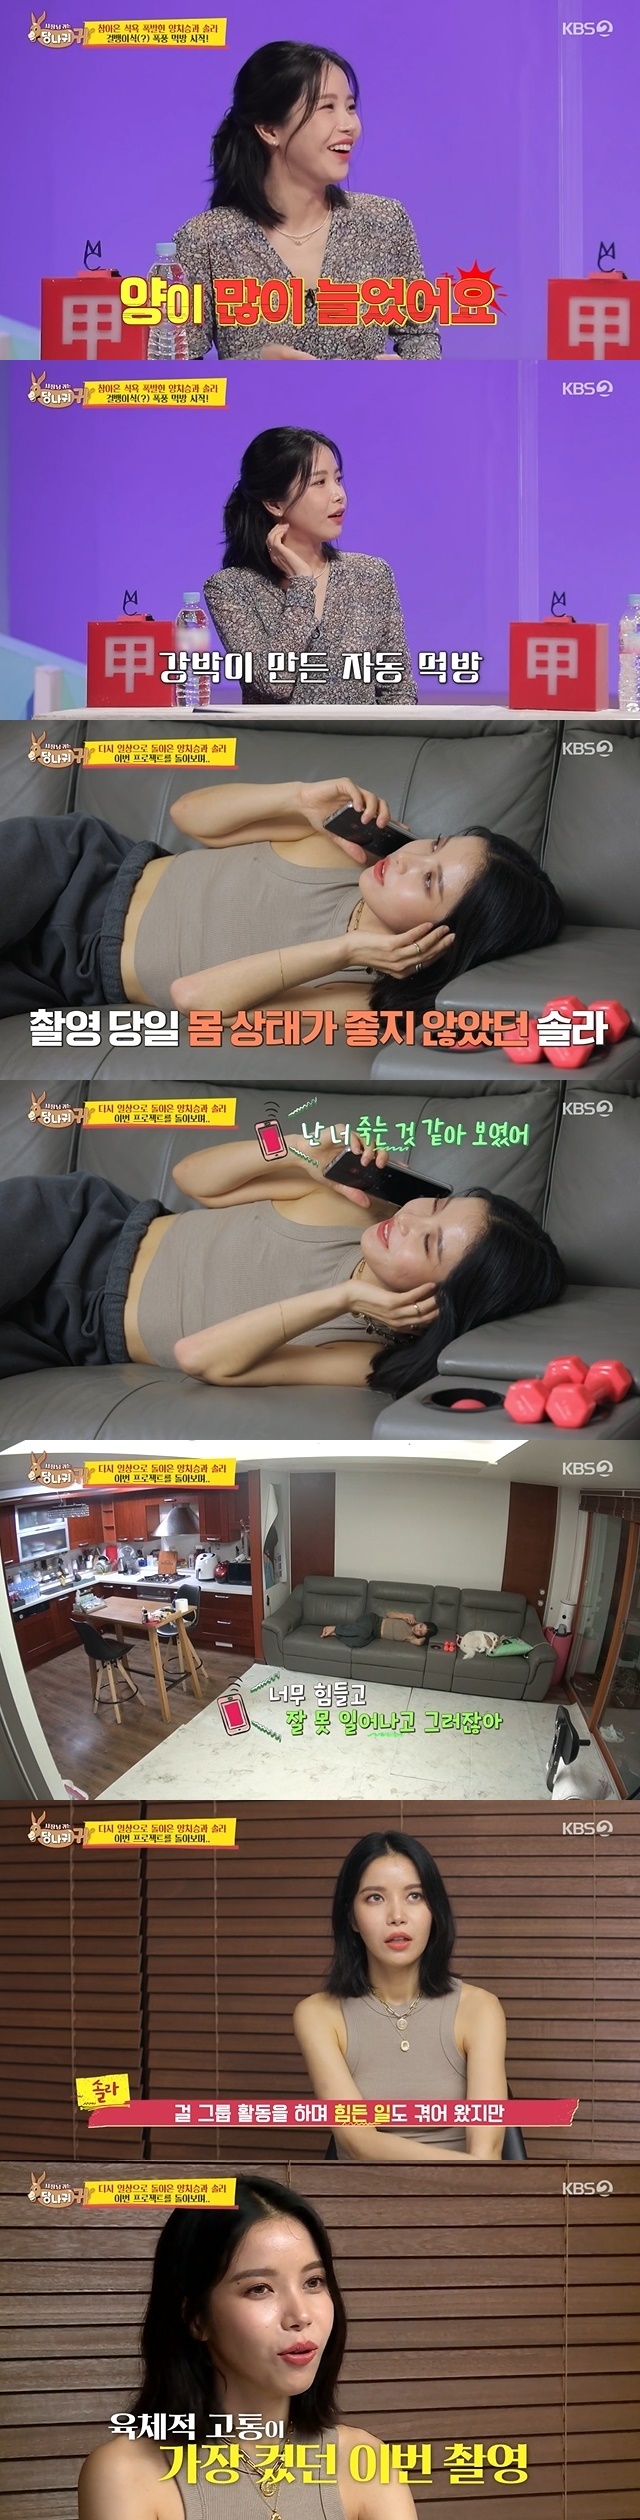 Sola, who lost 8kg for the magazine cover Model, reported the grievances and recent trends she suffered during her diet.In the 120th KBS 2TV entertainment Boss in the Mirror (hereinafter referred to as Donkey Ear) broadcast on August 22, Yang Chi-seong and Sola were portrayed after completing the magazine cover Model challenge safely.On this day, Sola did a small after-hours with Yang Chi-seong, who dieted together as soon as she finished shooting the magazine.Sola had time to eat all the foods she wanted to eat but had to endure as Yang Chi-seong led.Donkey ear MCs were more appalled than admiring the amount of Solas eating, so Sola said, I do not have that much sheep, but the amount has increased so far from that day.I think there was an obsession to eat both months. Sola worried after a Storm-like Mukbang, If you wake up tomorrow, will you have abs? Then Yang Chi-seong seemed to be right, Abdominal?Im gone (already) now, Sola said, futile, saying that her three-month effort had disappeared into a single meal, I feel a real betrayal.Sola later returned home and told her sister that she had finished filming well: I almost died this morning, I dont think Ill ever be able to do it again.Its too hard, said Toro, who was sincere.I looked like you were dying. My face was gray in the morning, he said. It was so hard and wrong.I want to eat, eat what I endured, and then lets do it a little bit. It was my sisters heart that wanted Solas health.On the other hand, Sola lost 8kg of his current condition, and confessed that he had 7kg in three days.Sola said, I think I will eat almost all the food, he said, referring to medicines, kimchi stew, pork belly, miso stew, hamburger and pizza.Sola replied to MCs who had eaten it for three days, I ate it until the moment I woke up and fell asleep.Sola laughed at the simple explanation that the remaining six packs, which were clear earlier, were watermelon.